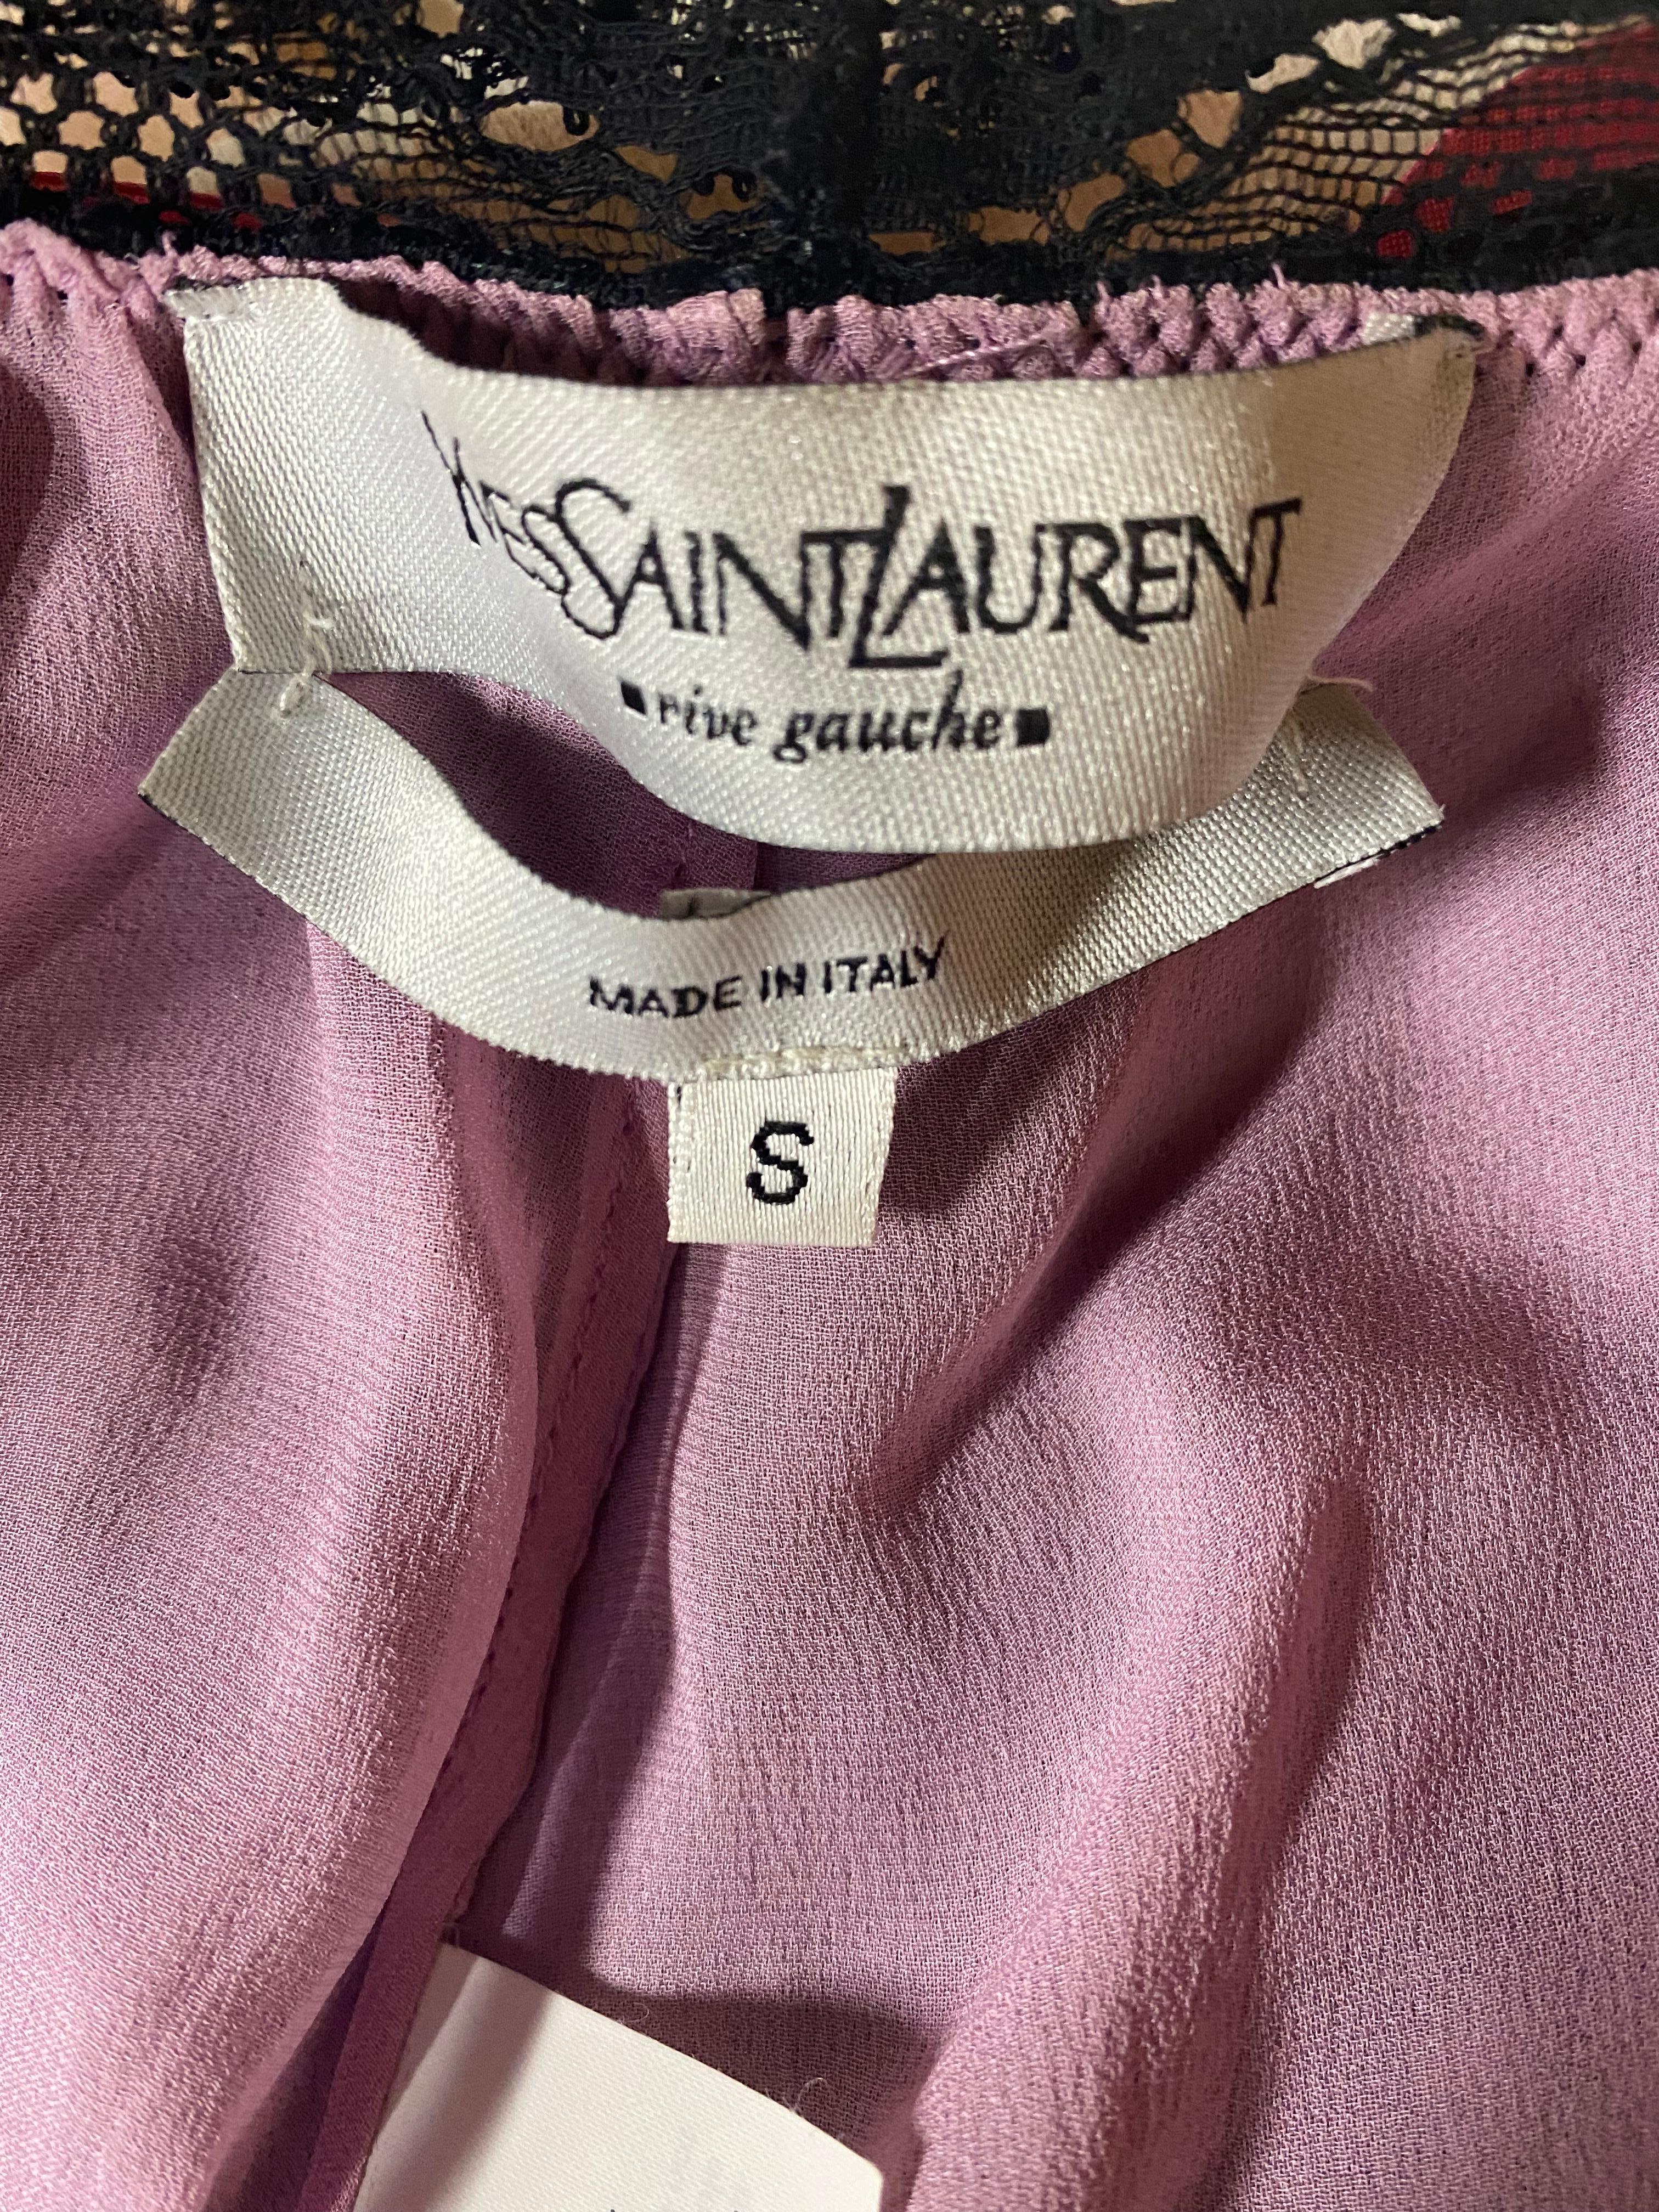 Yves Saint Laurent Rive Gauche Black and Pink Cami Tank Top, Size Small In Excellent Condition For Sale In Beverly Hills, CA